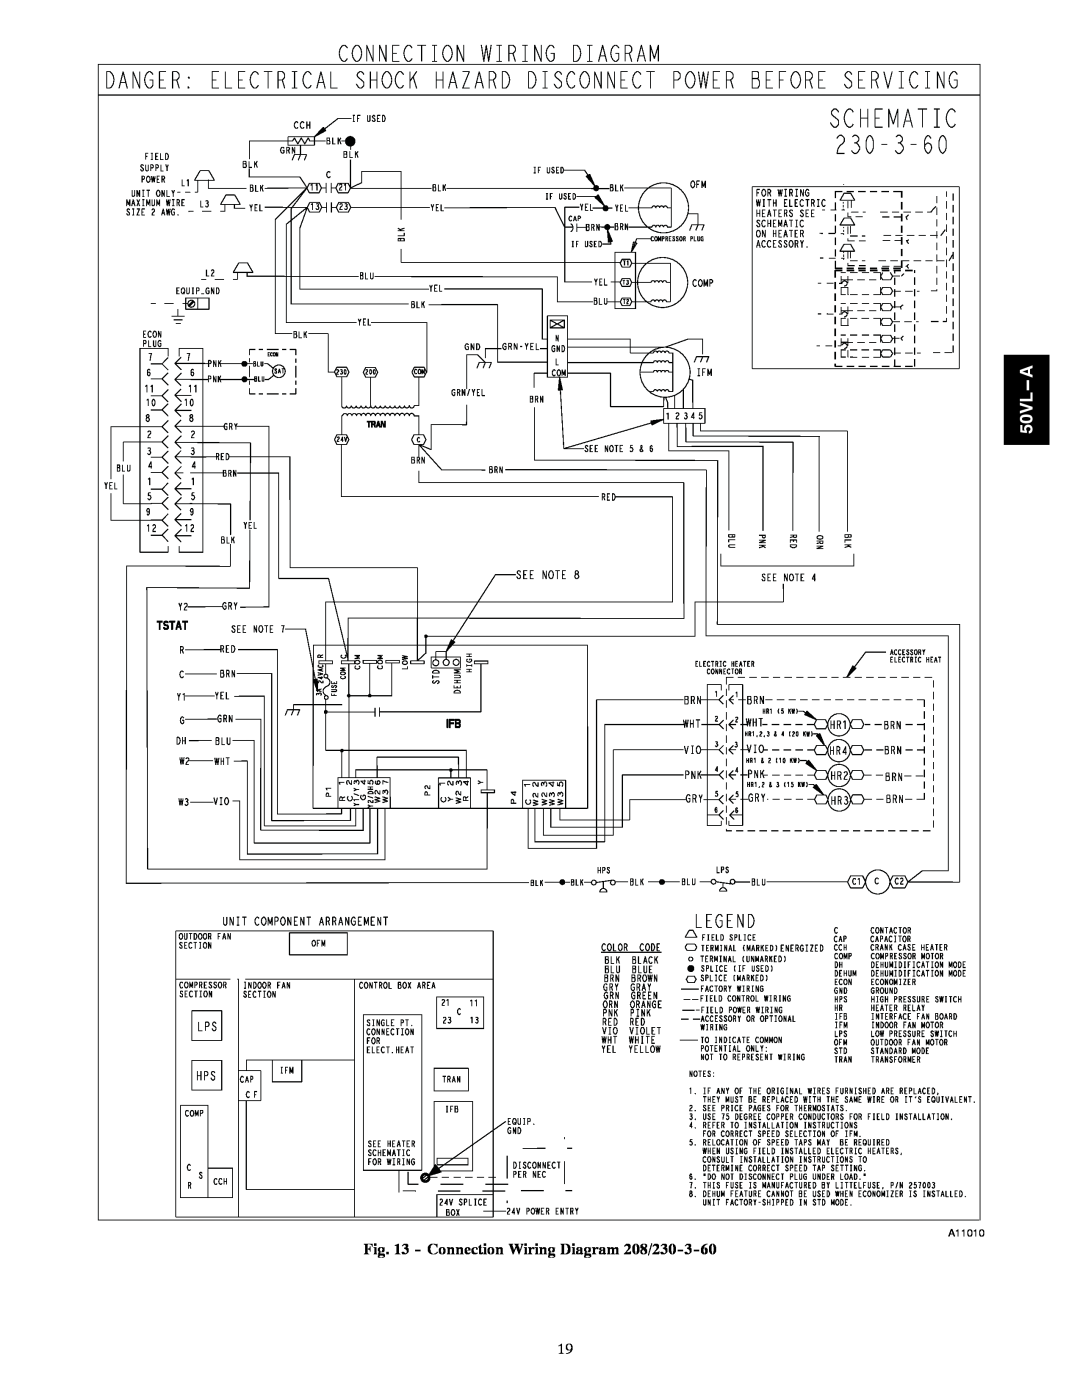 Carrier 50VL---A installation instructions Connection Wiring Diagram 208/230-3-60, 50VL A, A11010 